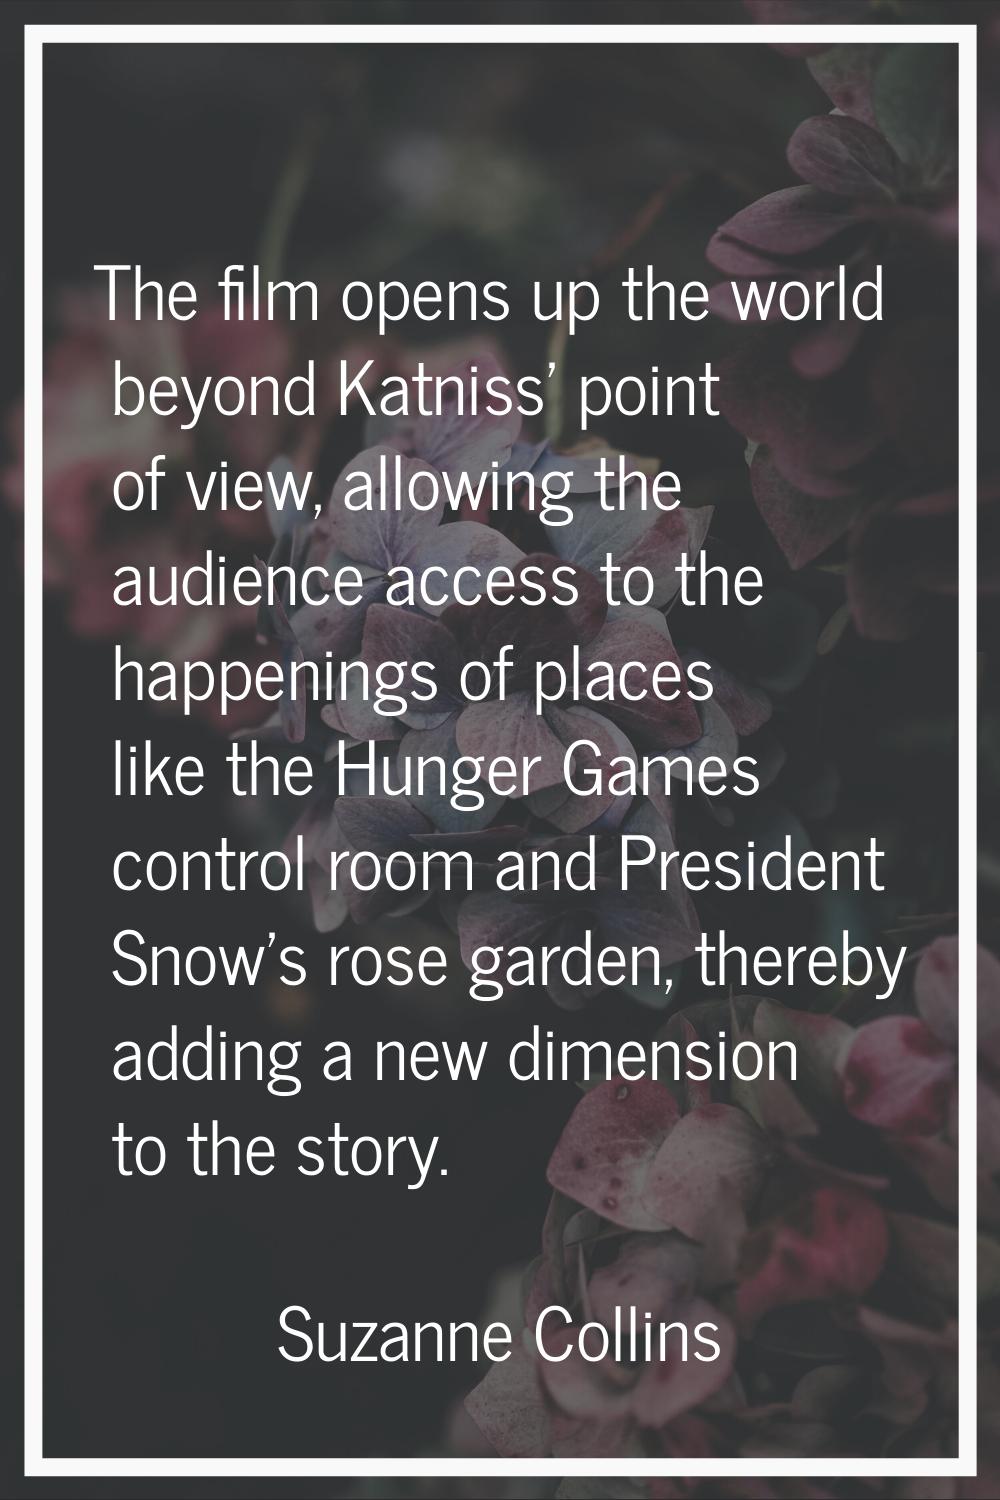 The film opens up the world beyond Katniss' point of view, allowing the audience access to the happ